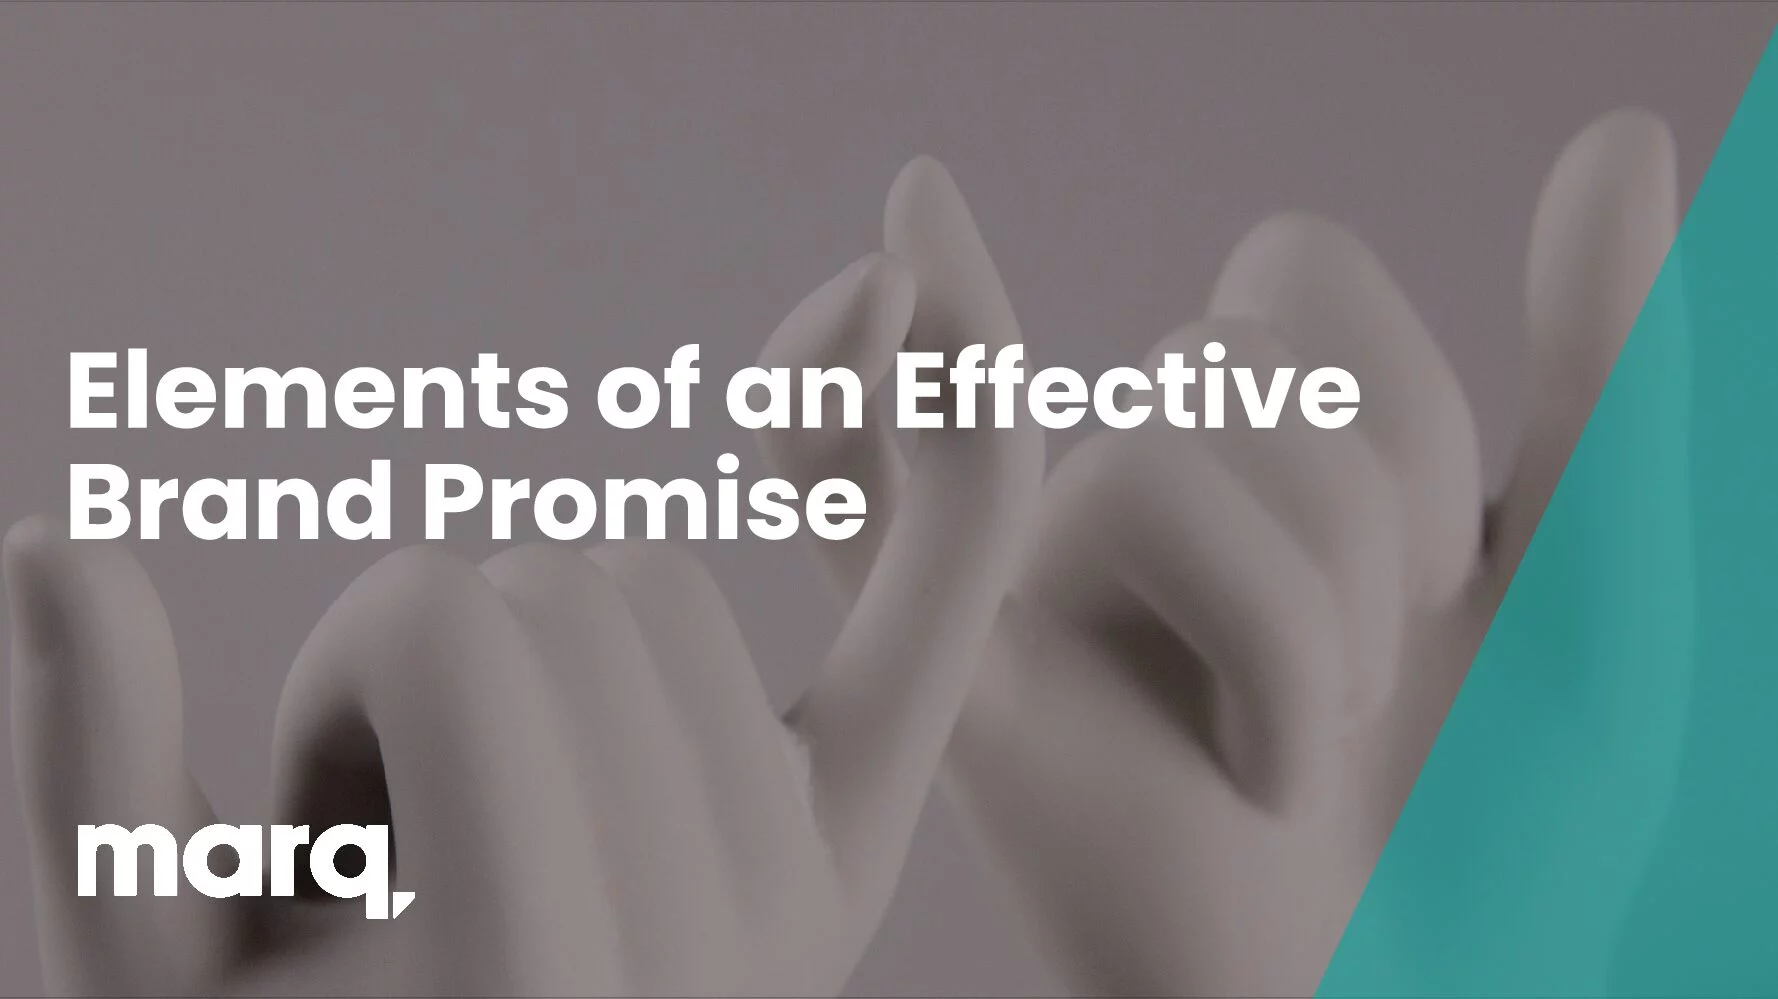 Elements of an effective brand promise